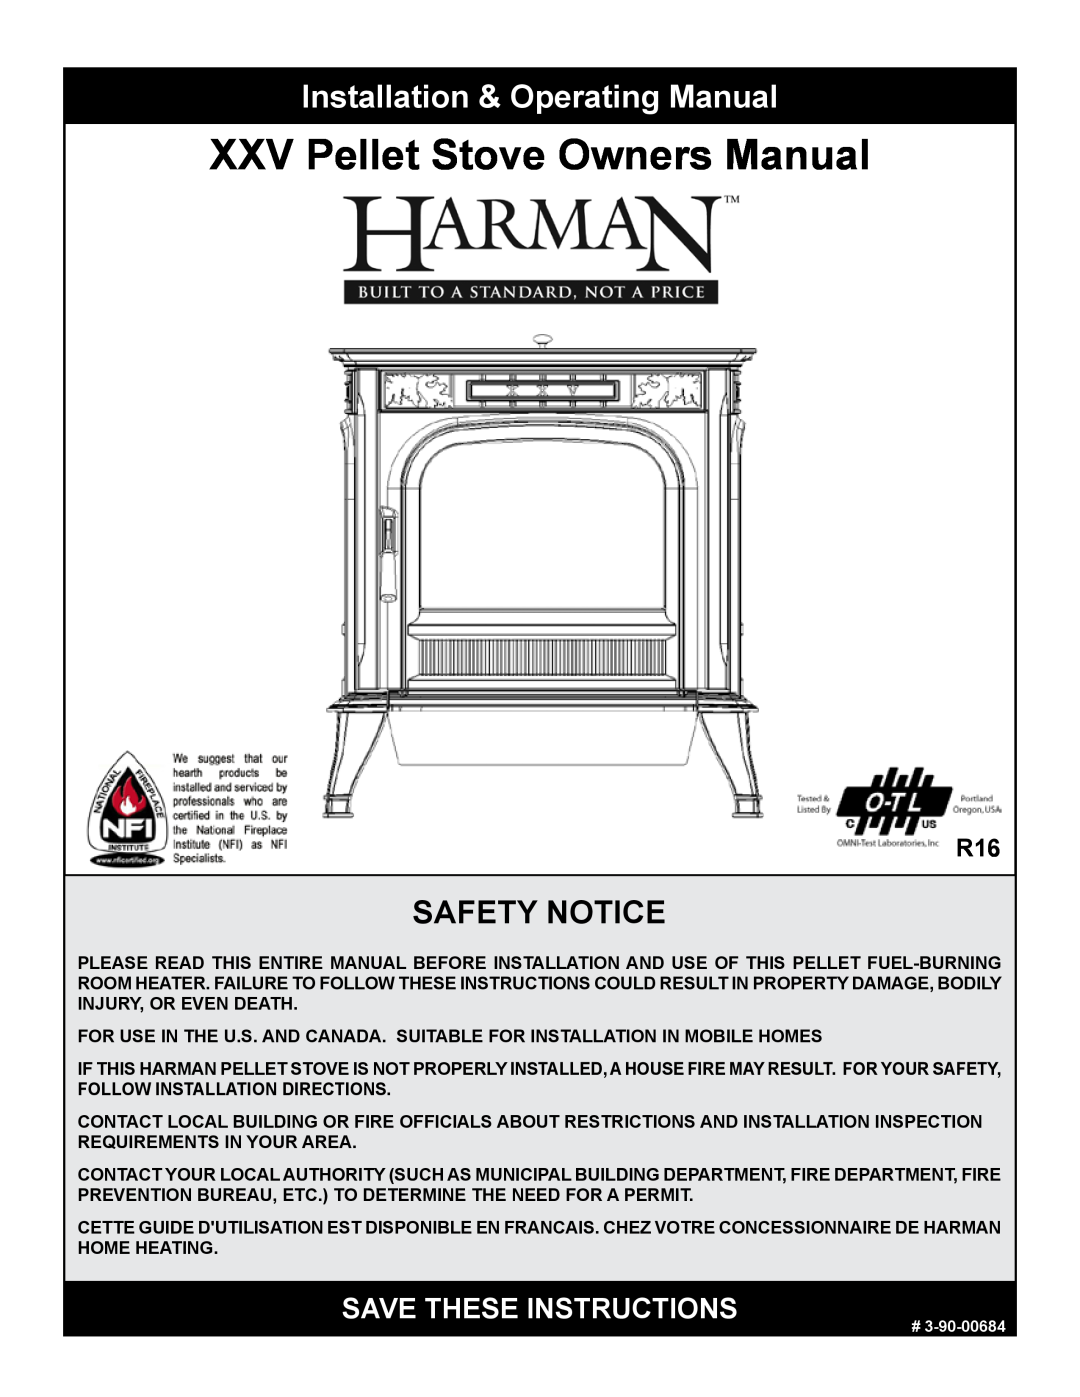 Harman Stove Company R16 manual Installation & Operating Manual, Safety Notice, save these instructions 